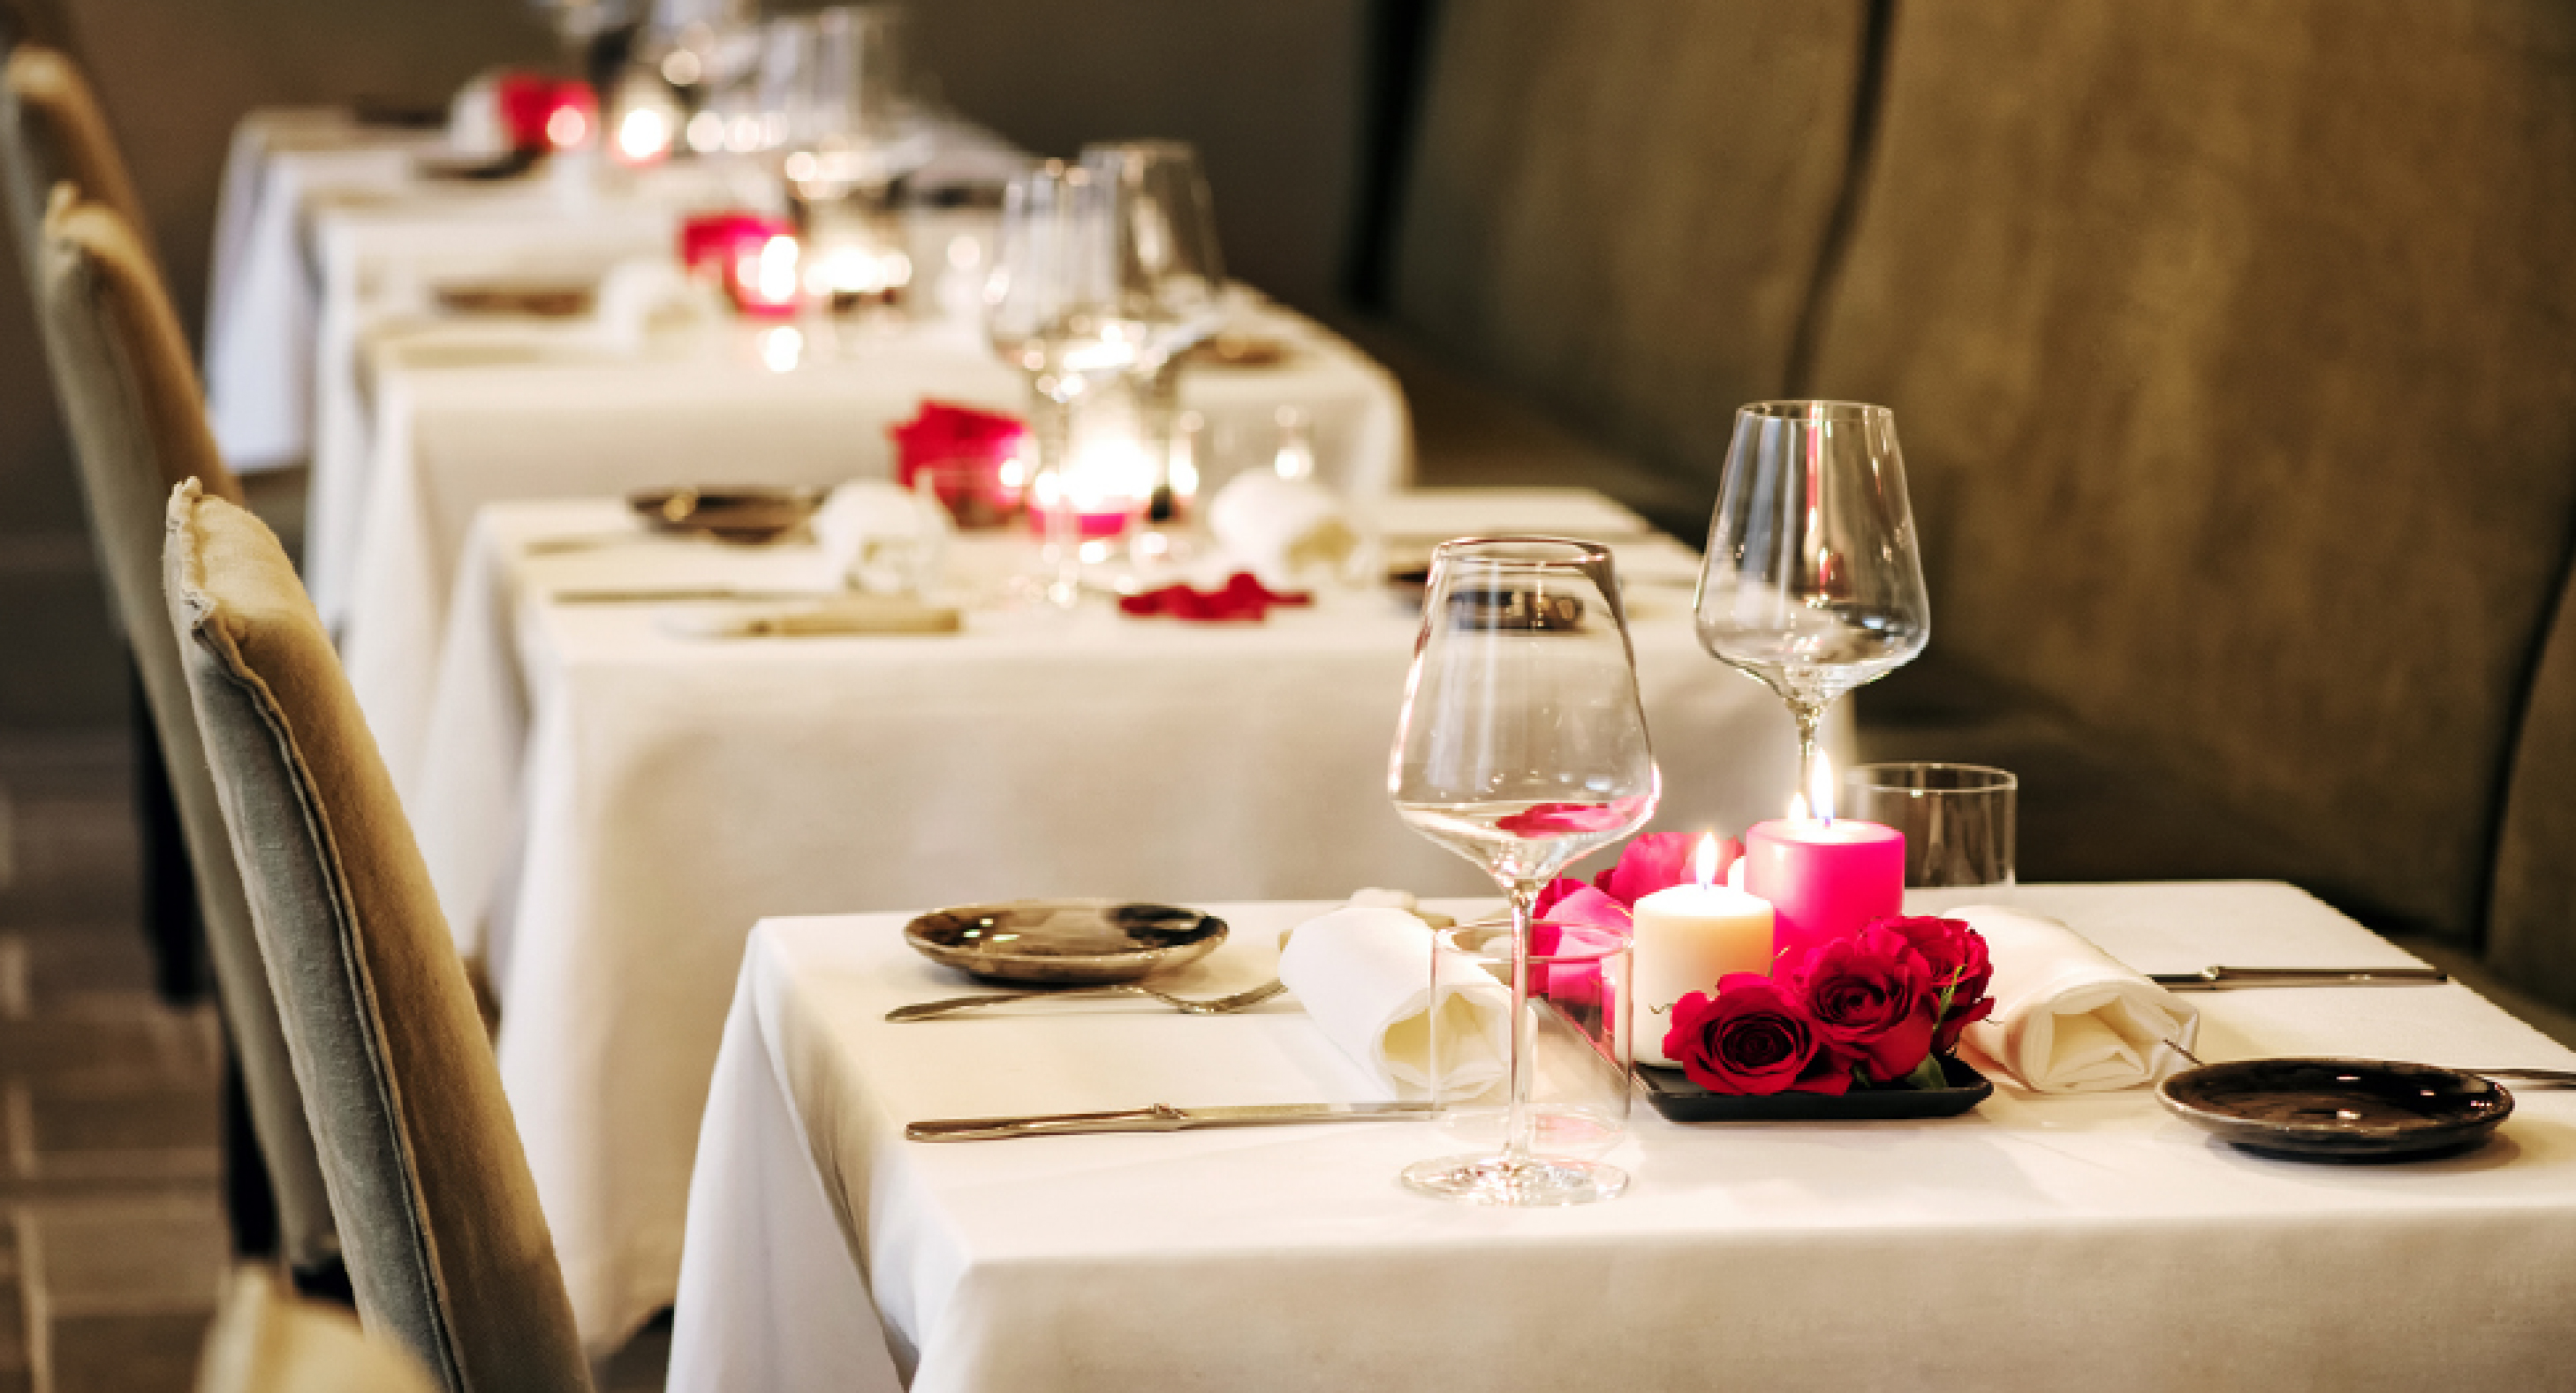 How Restauranteurs Can Re-Think Valentine’s Day